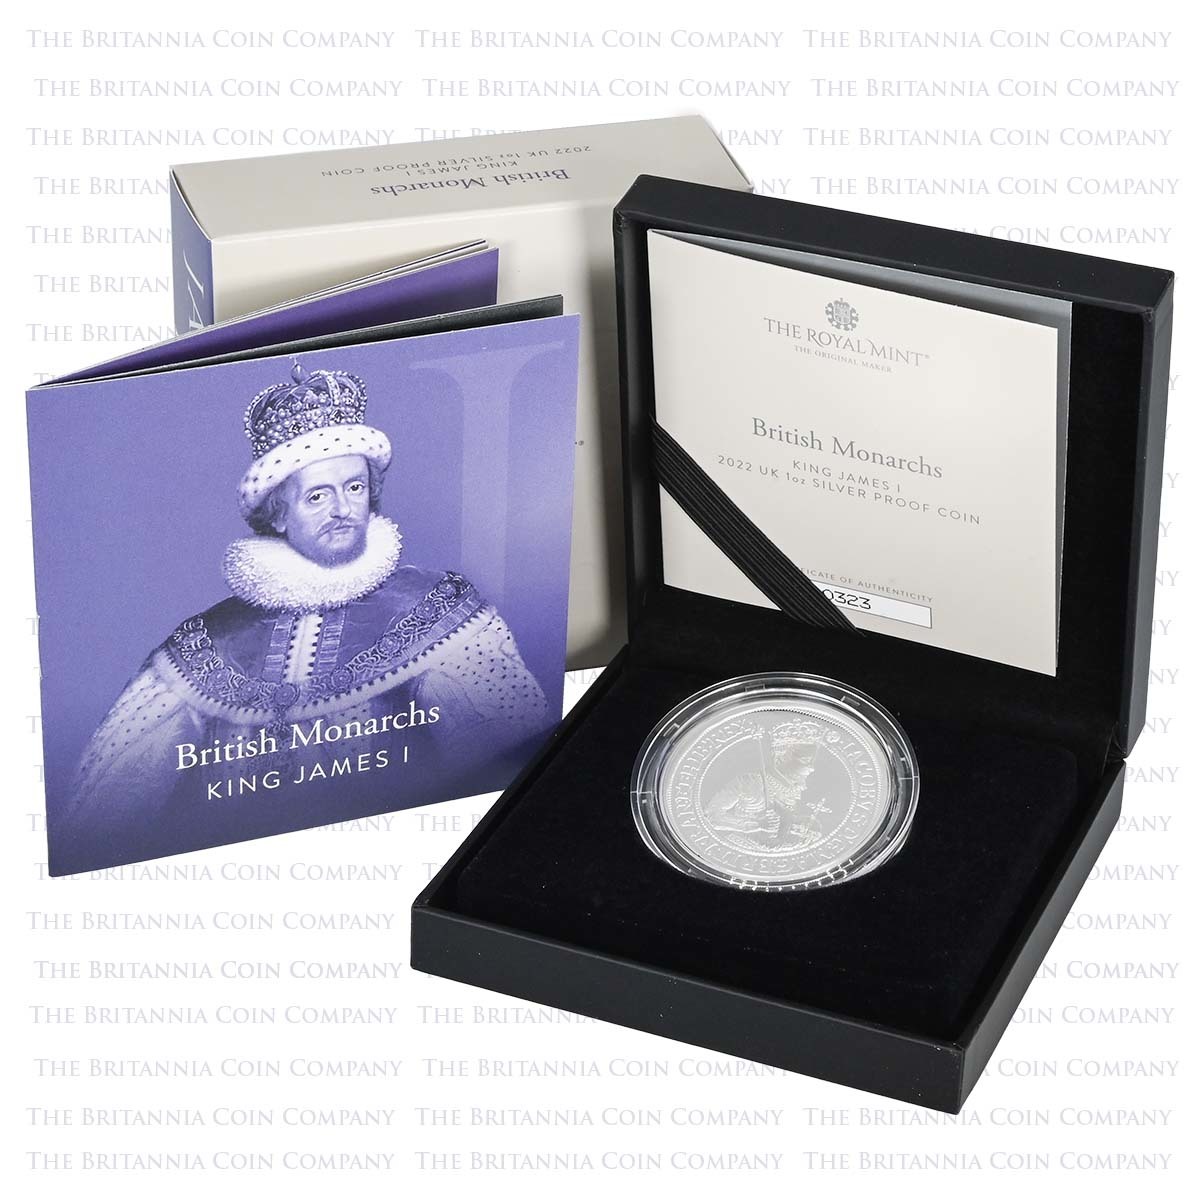 2022 British Monarchs James I 1 Ounce Silver Proof Boxed